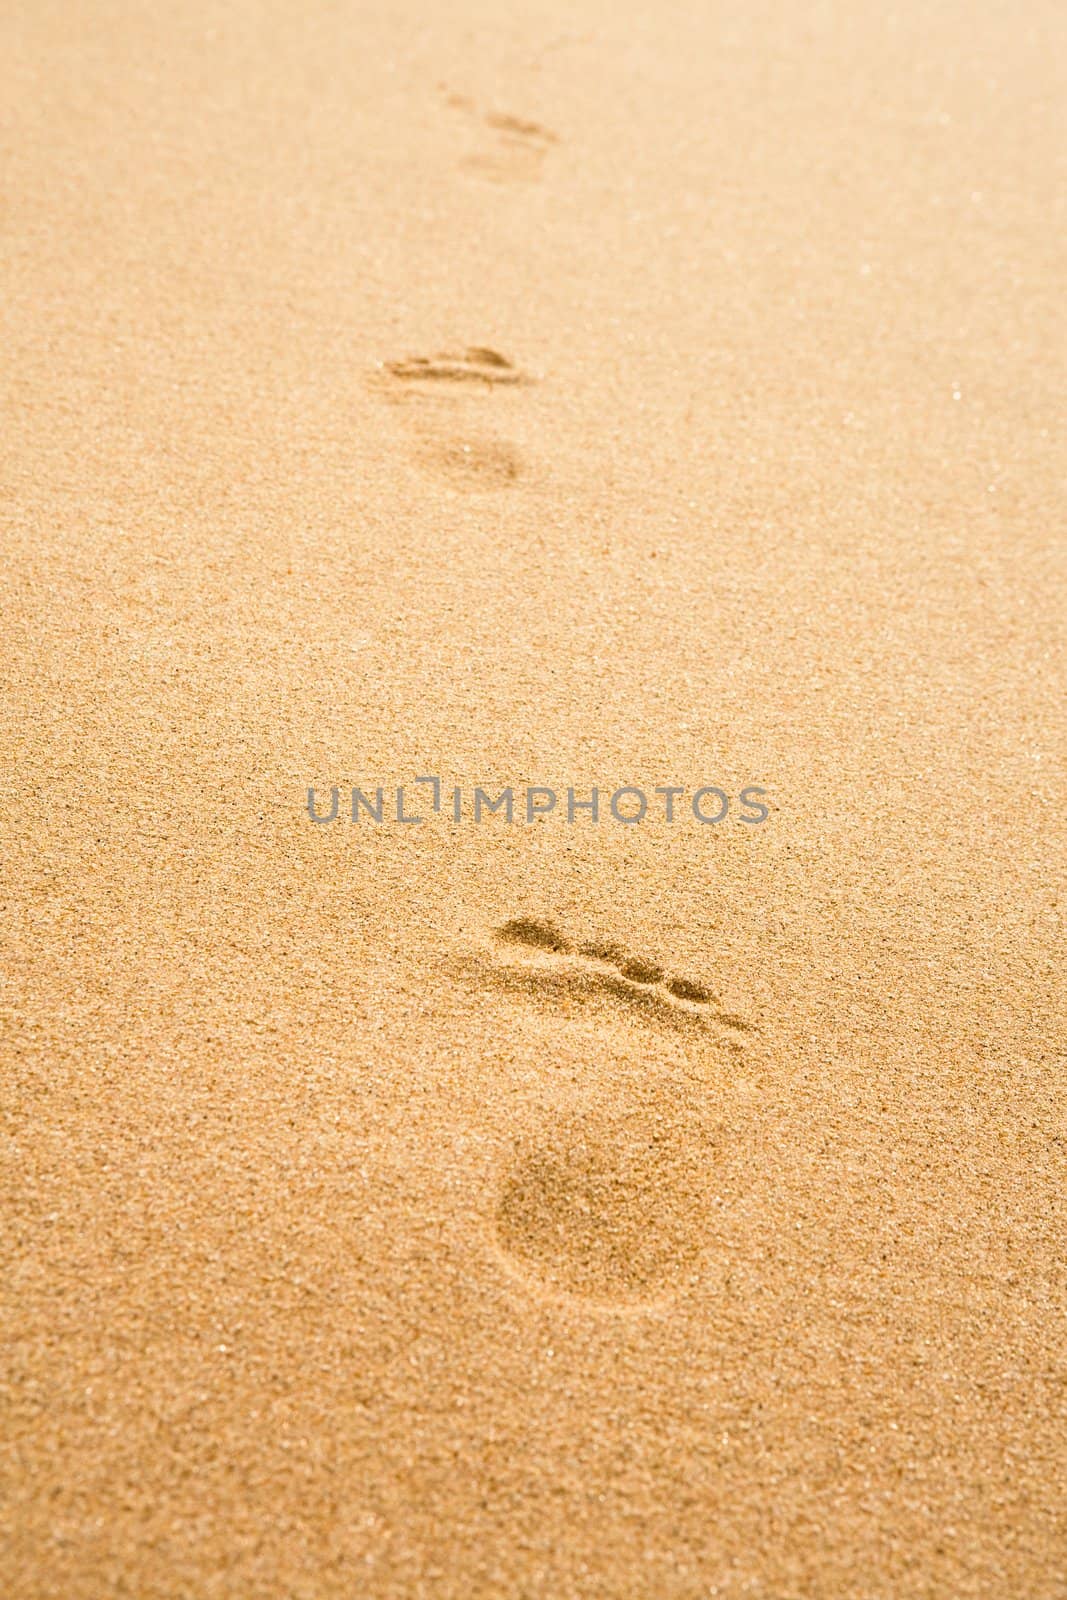 Traces of the person on yellow sand on a beach
